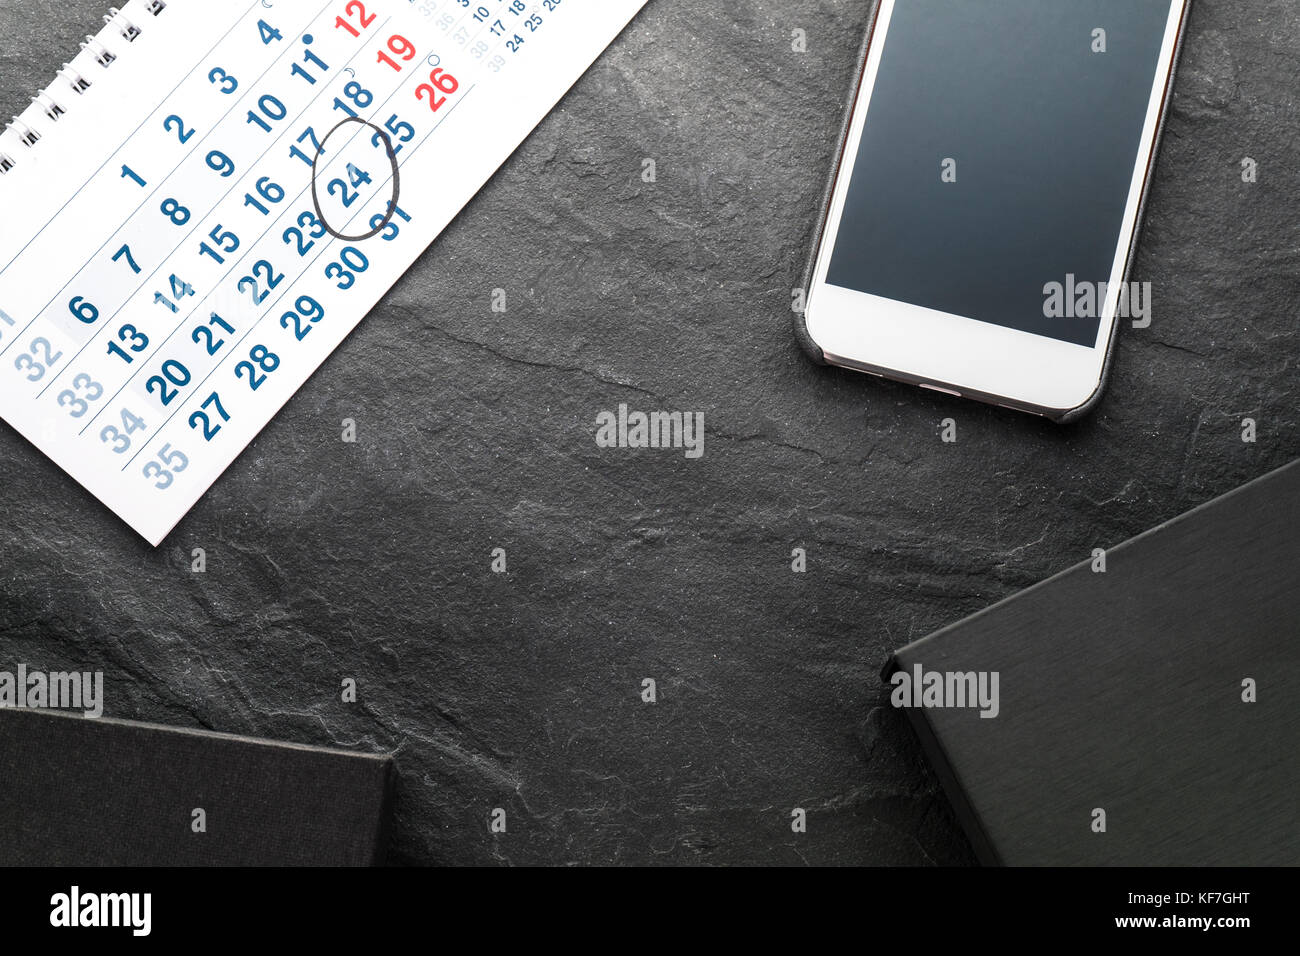 Frame from calendar, phone and gift boxes horizontal Stock Photo